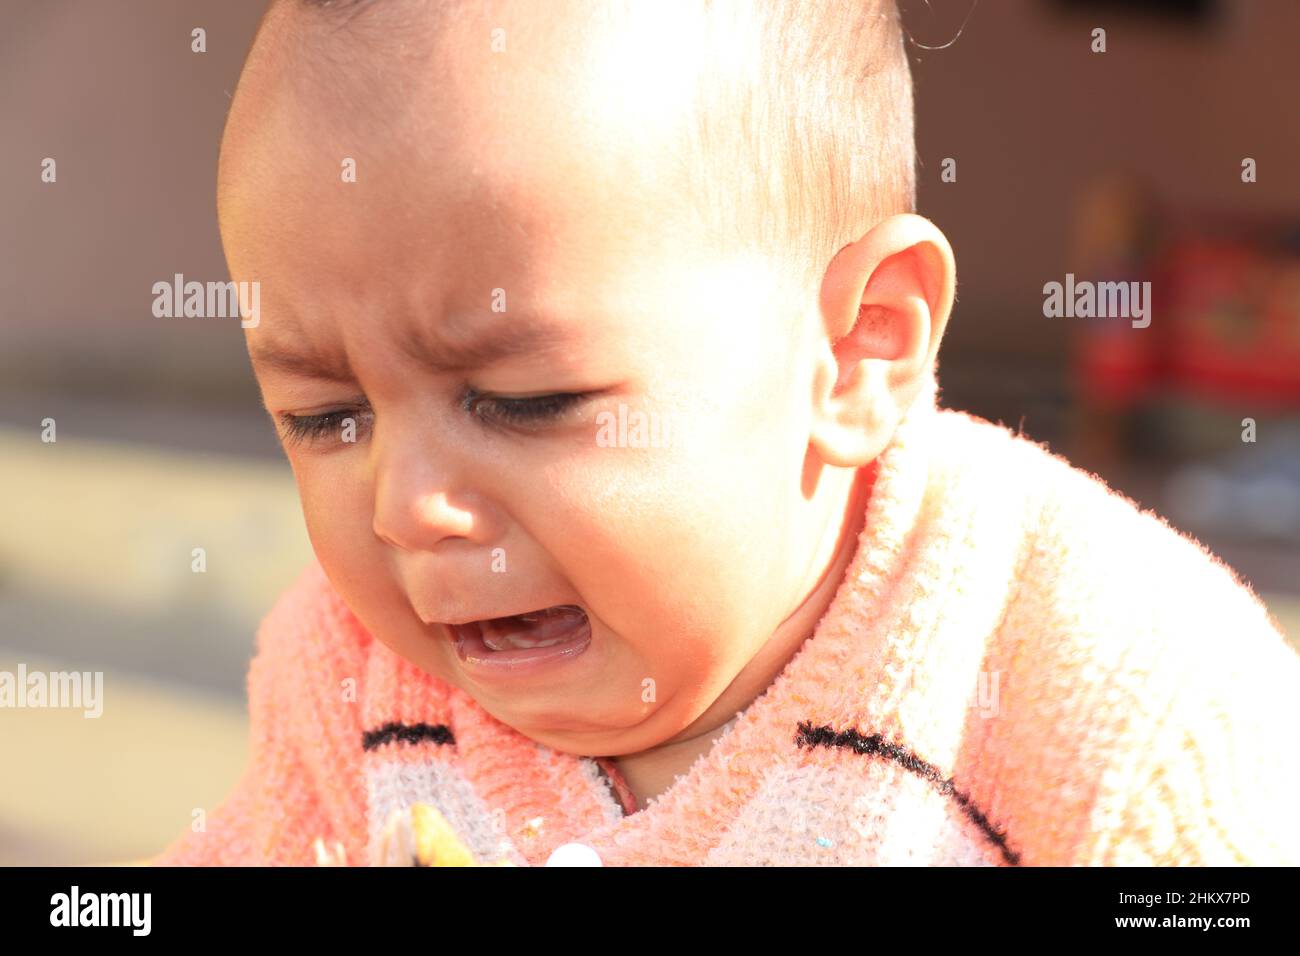 funny crying baby faces